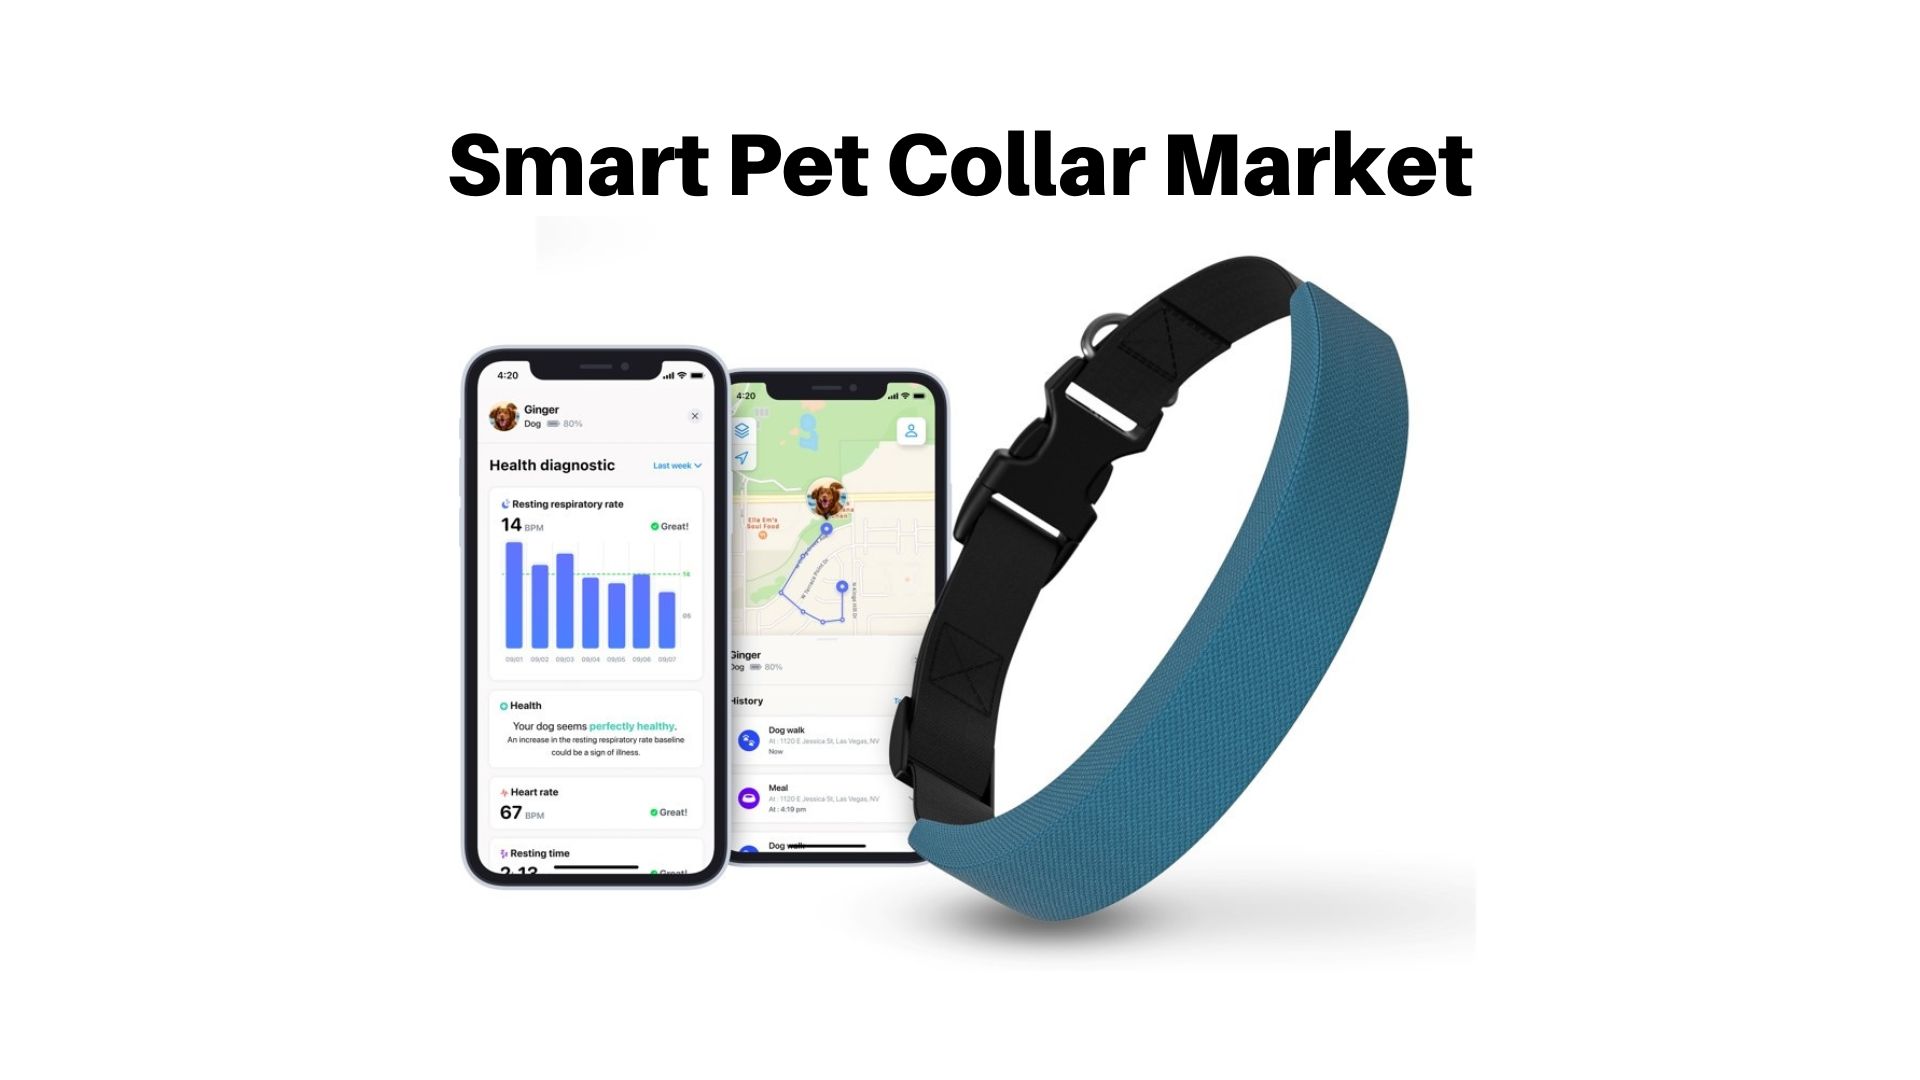 Smart Pet Collar Market Growing at a CAGR of 10% Which Revolutionizing the Pet Care Industry